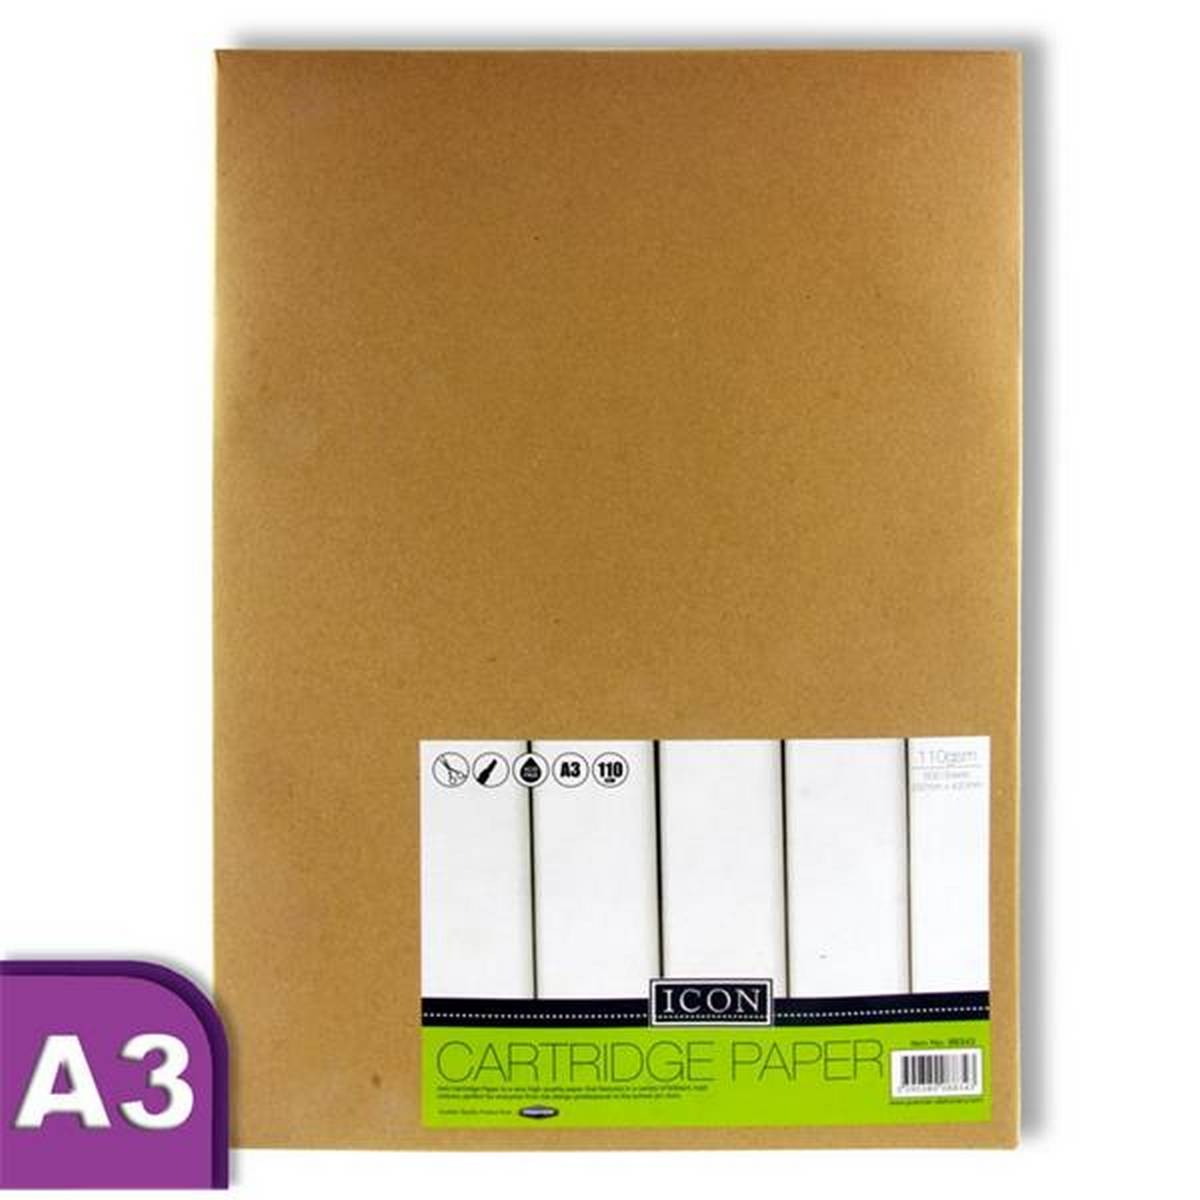 A3 Cartridge Paper 110gms Pack of 500